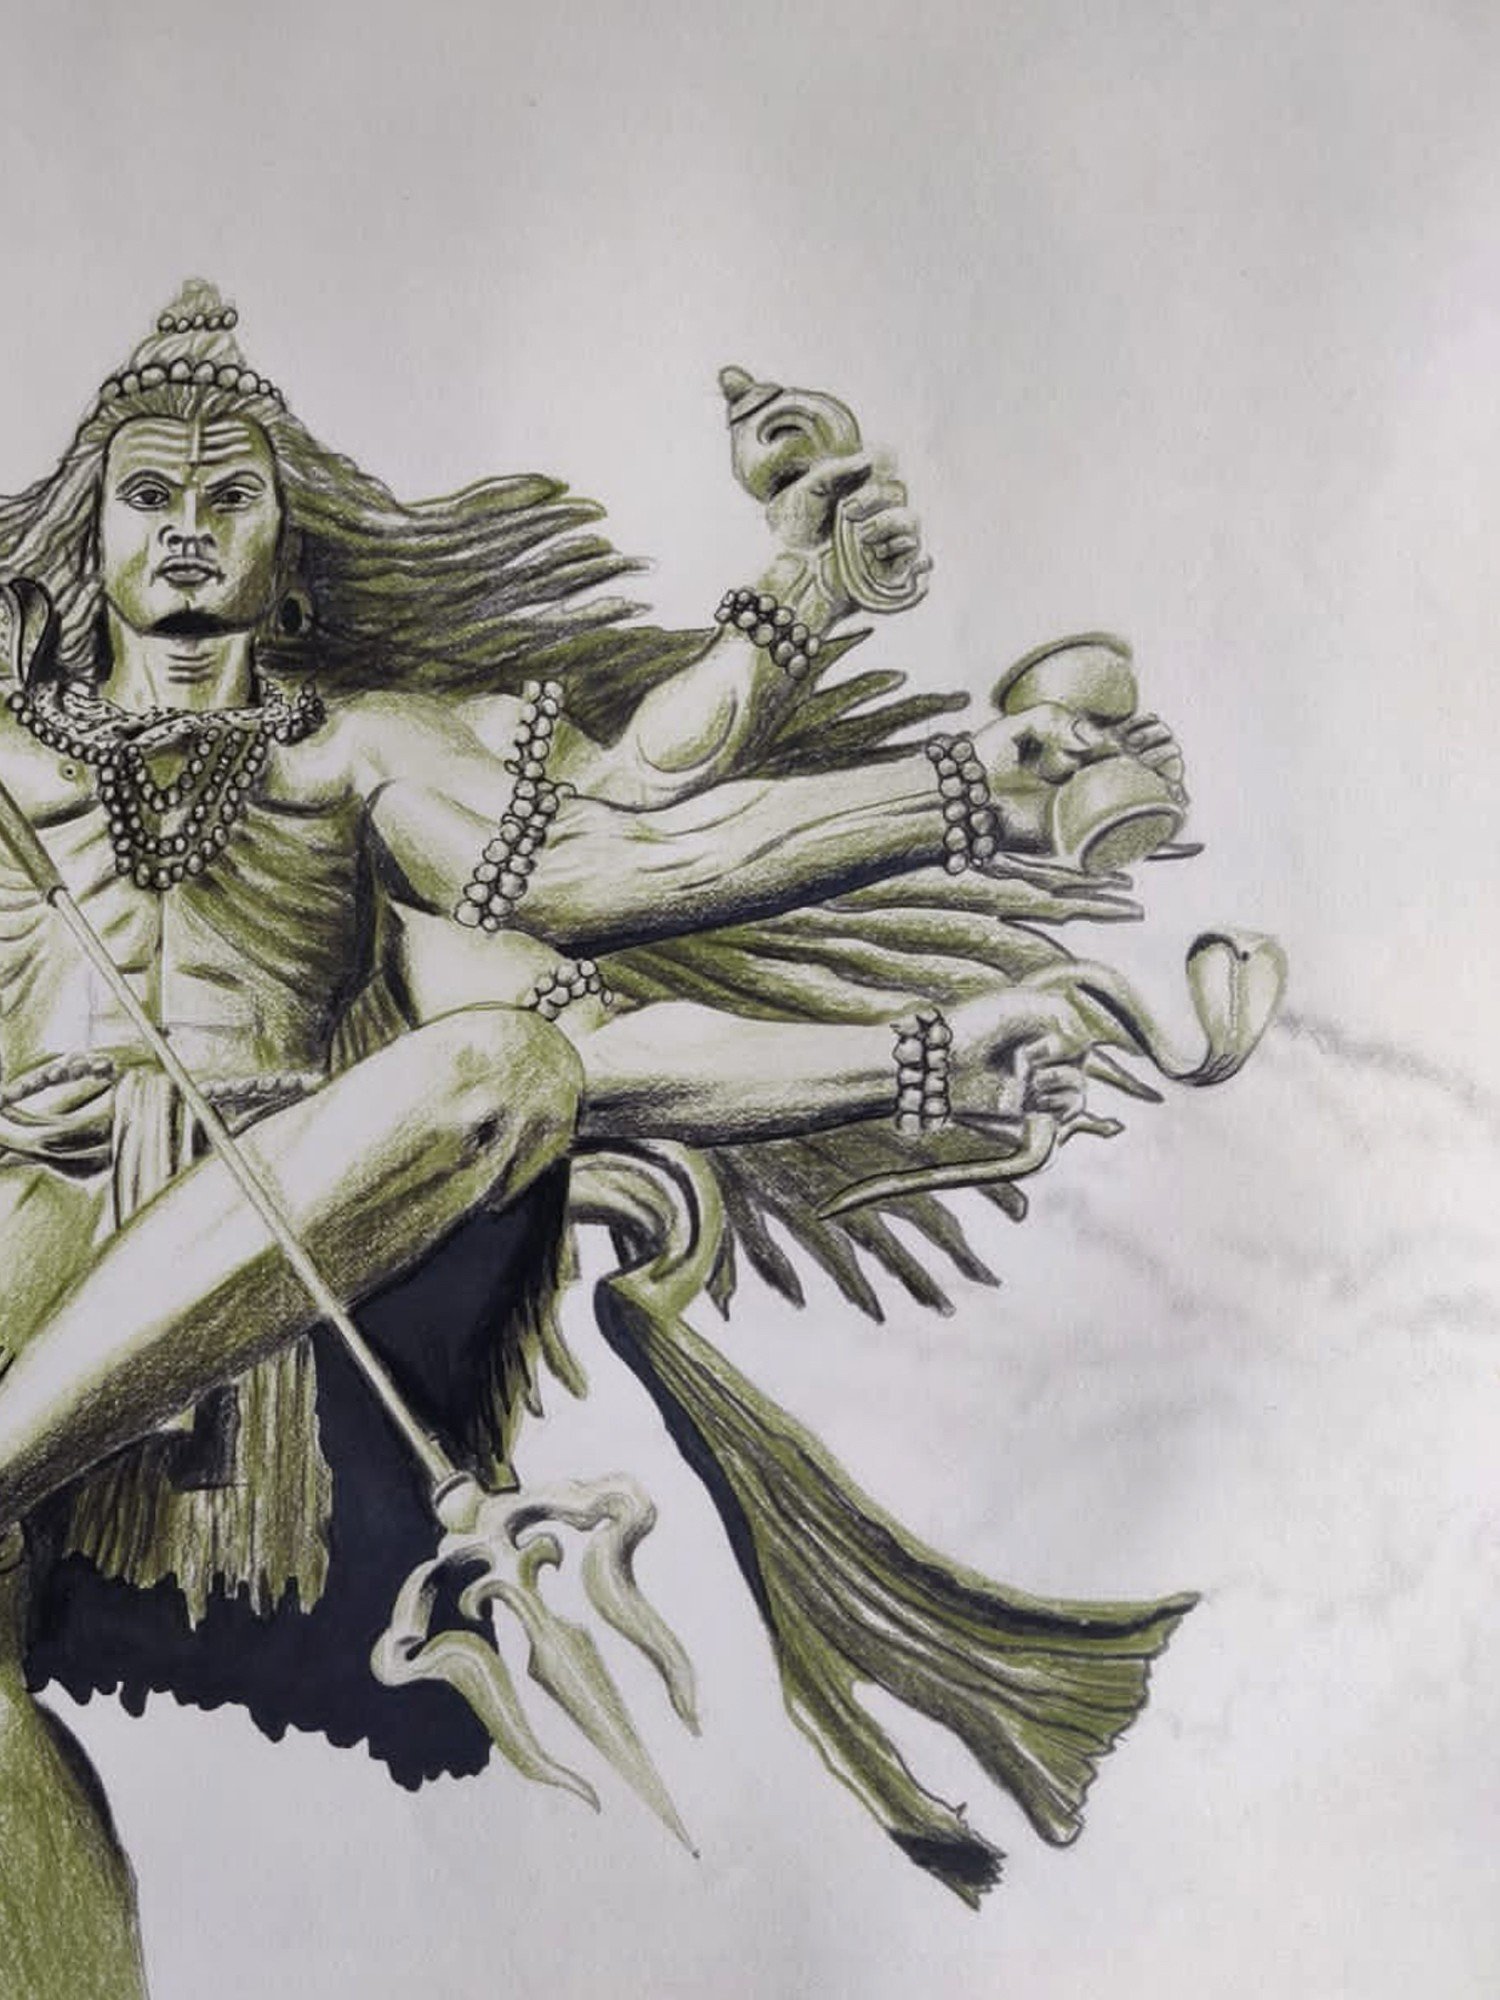 lord Shiva Angry by bhaskyboy on DeviantArt